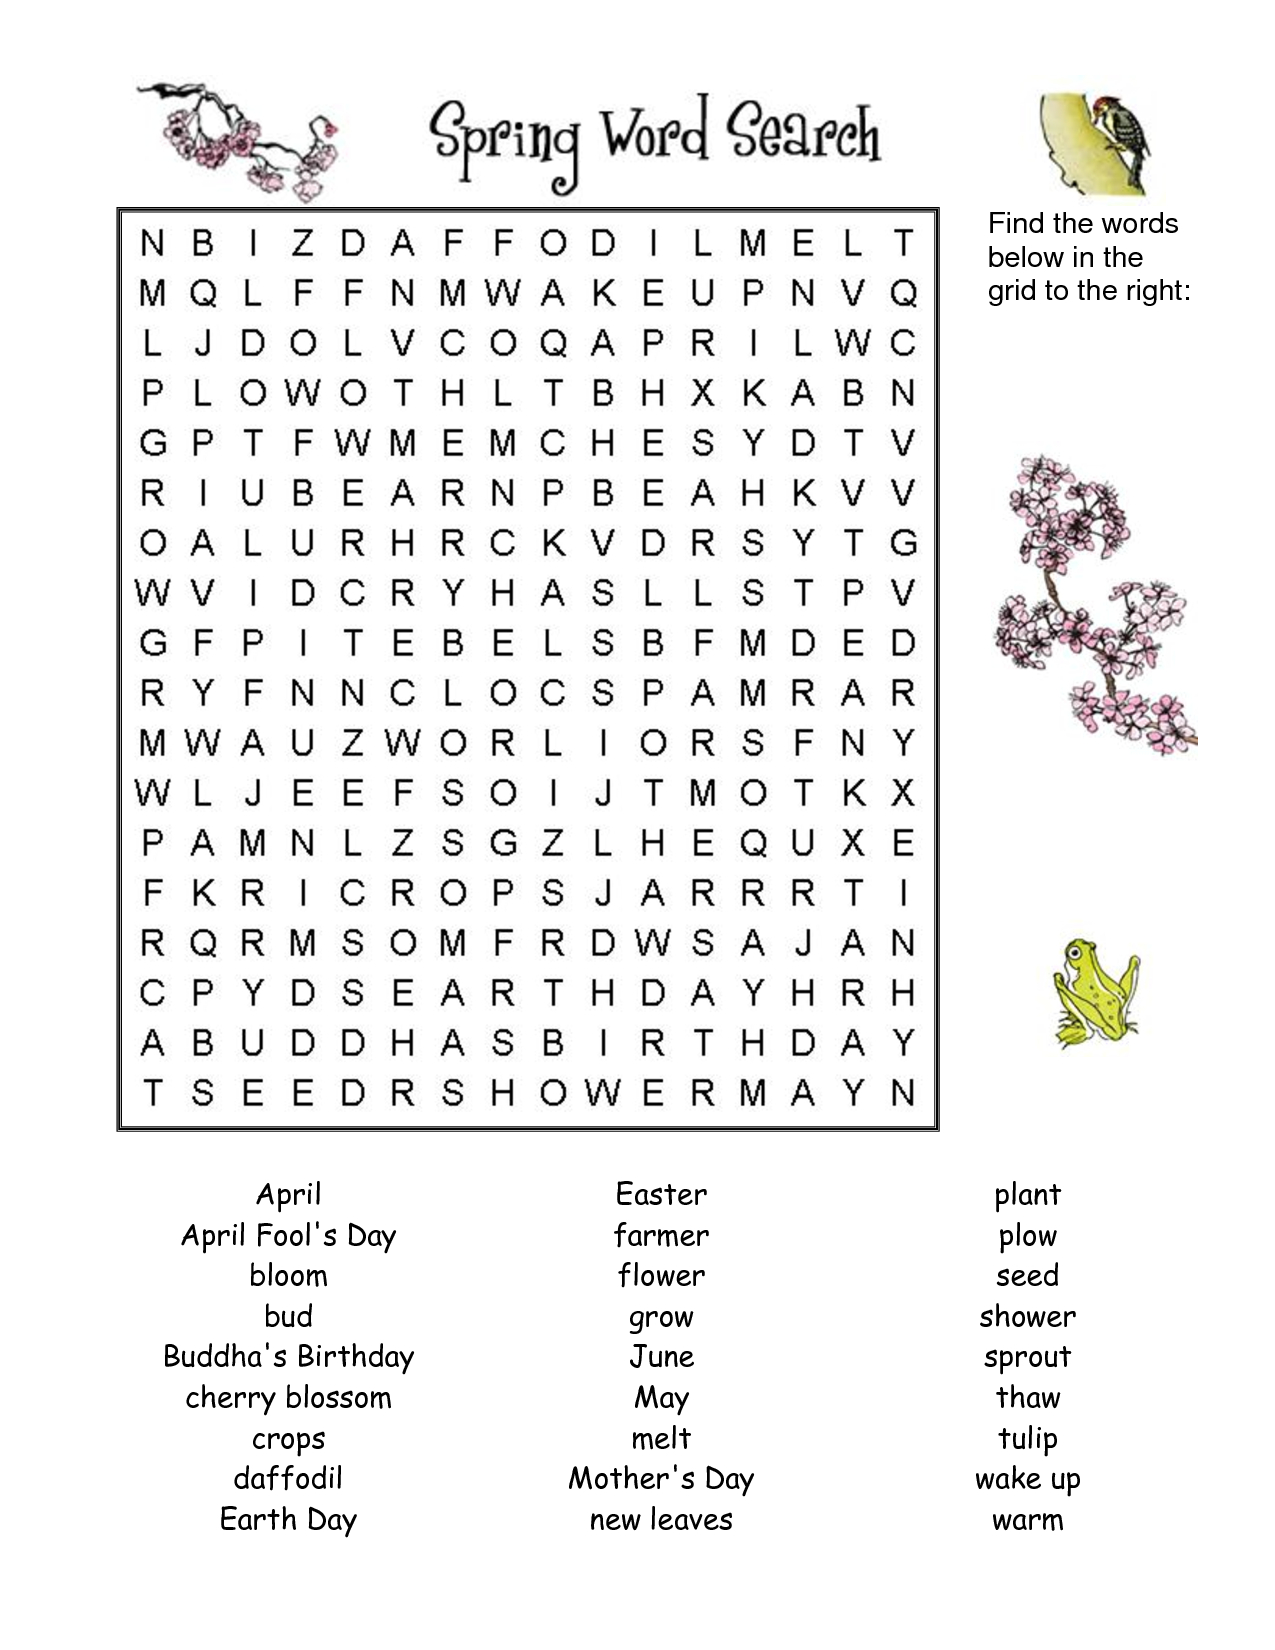 7 Printable Spring Word Searches | Kittybabylove - Printable Spring Crossword Puzzles